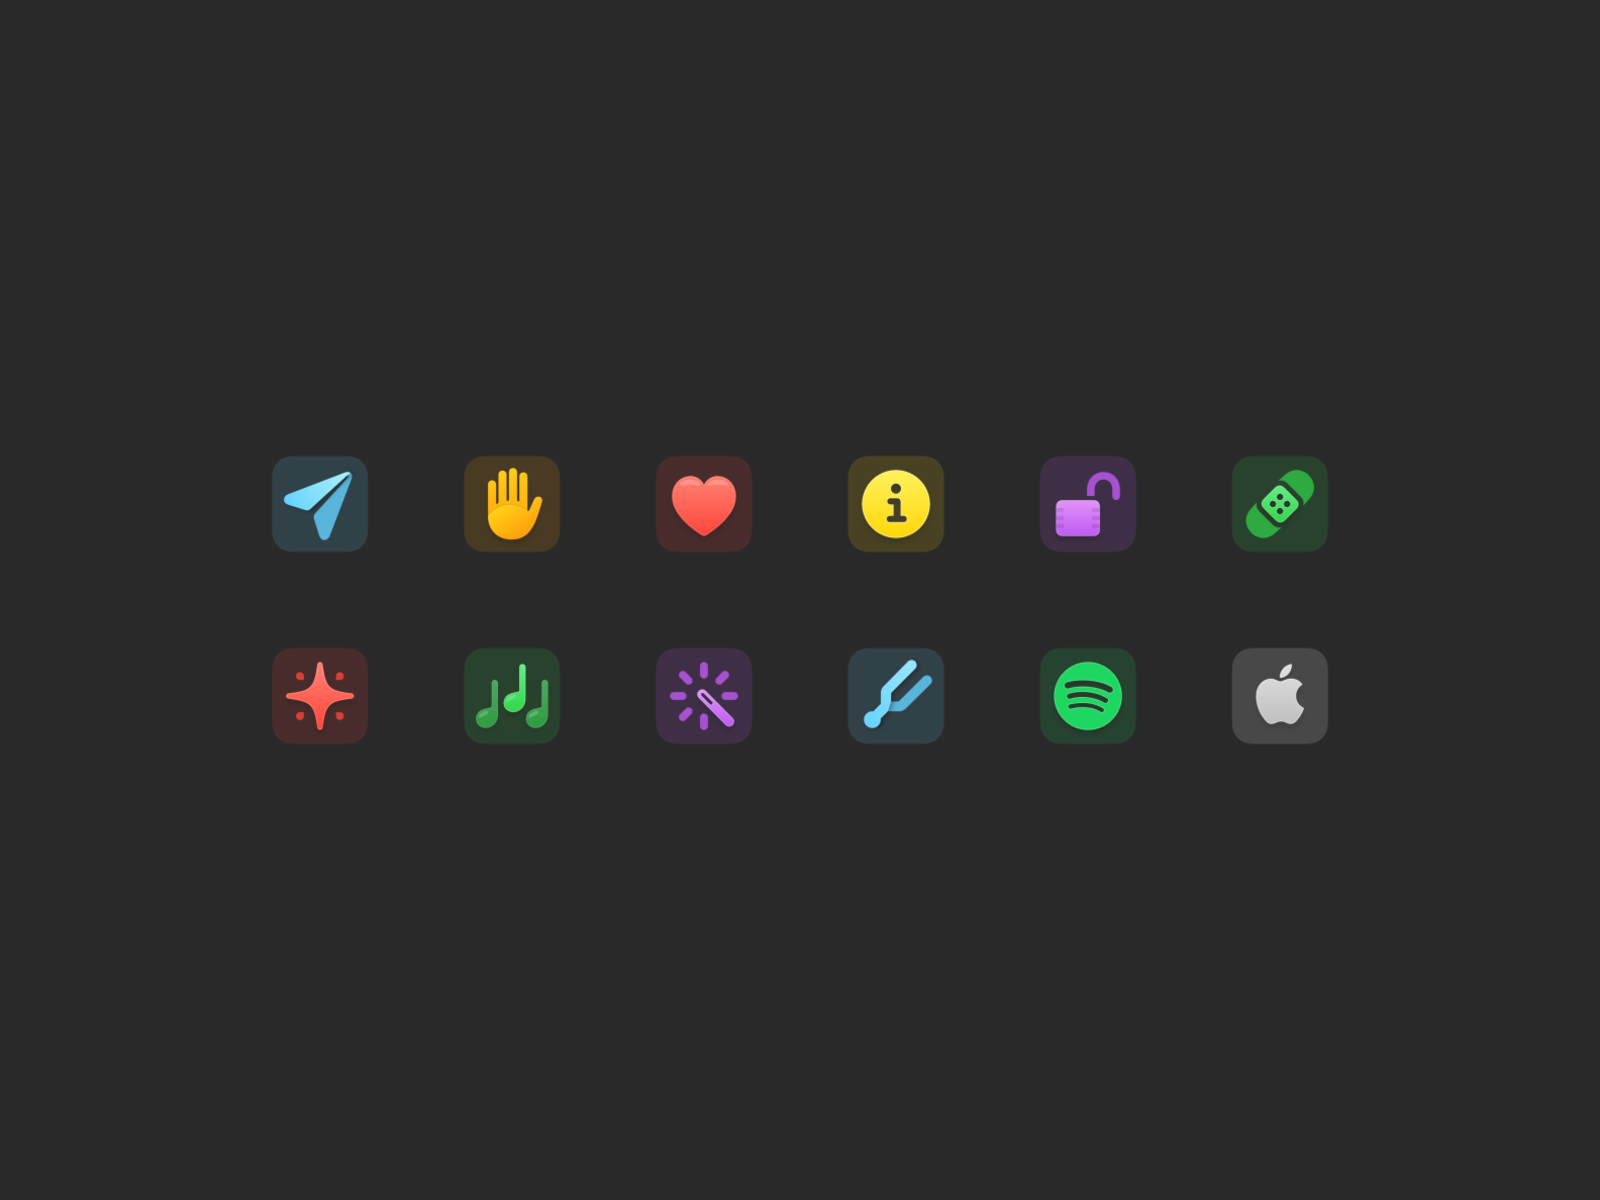 Klank icons and update